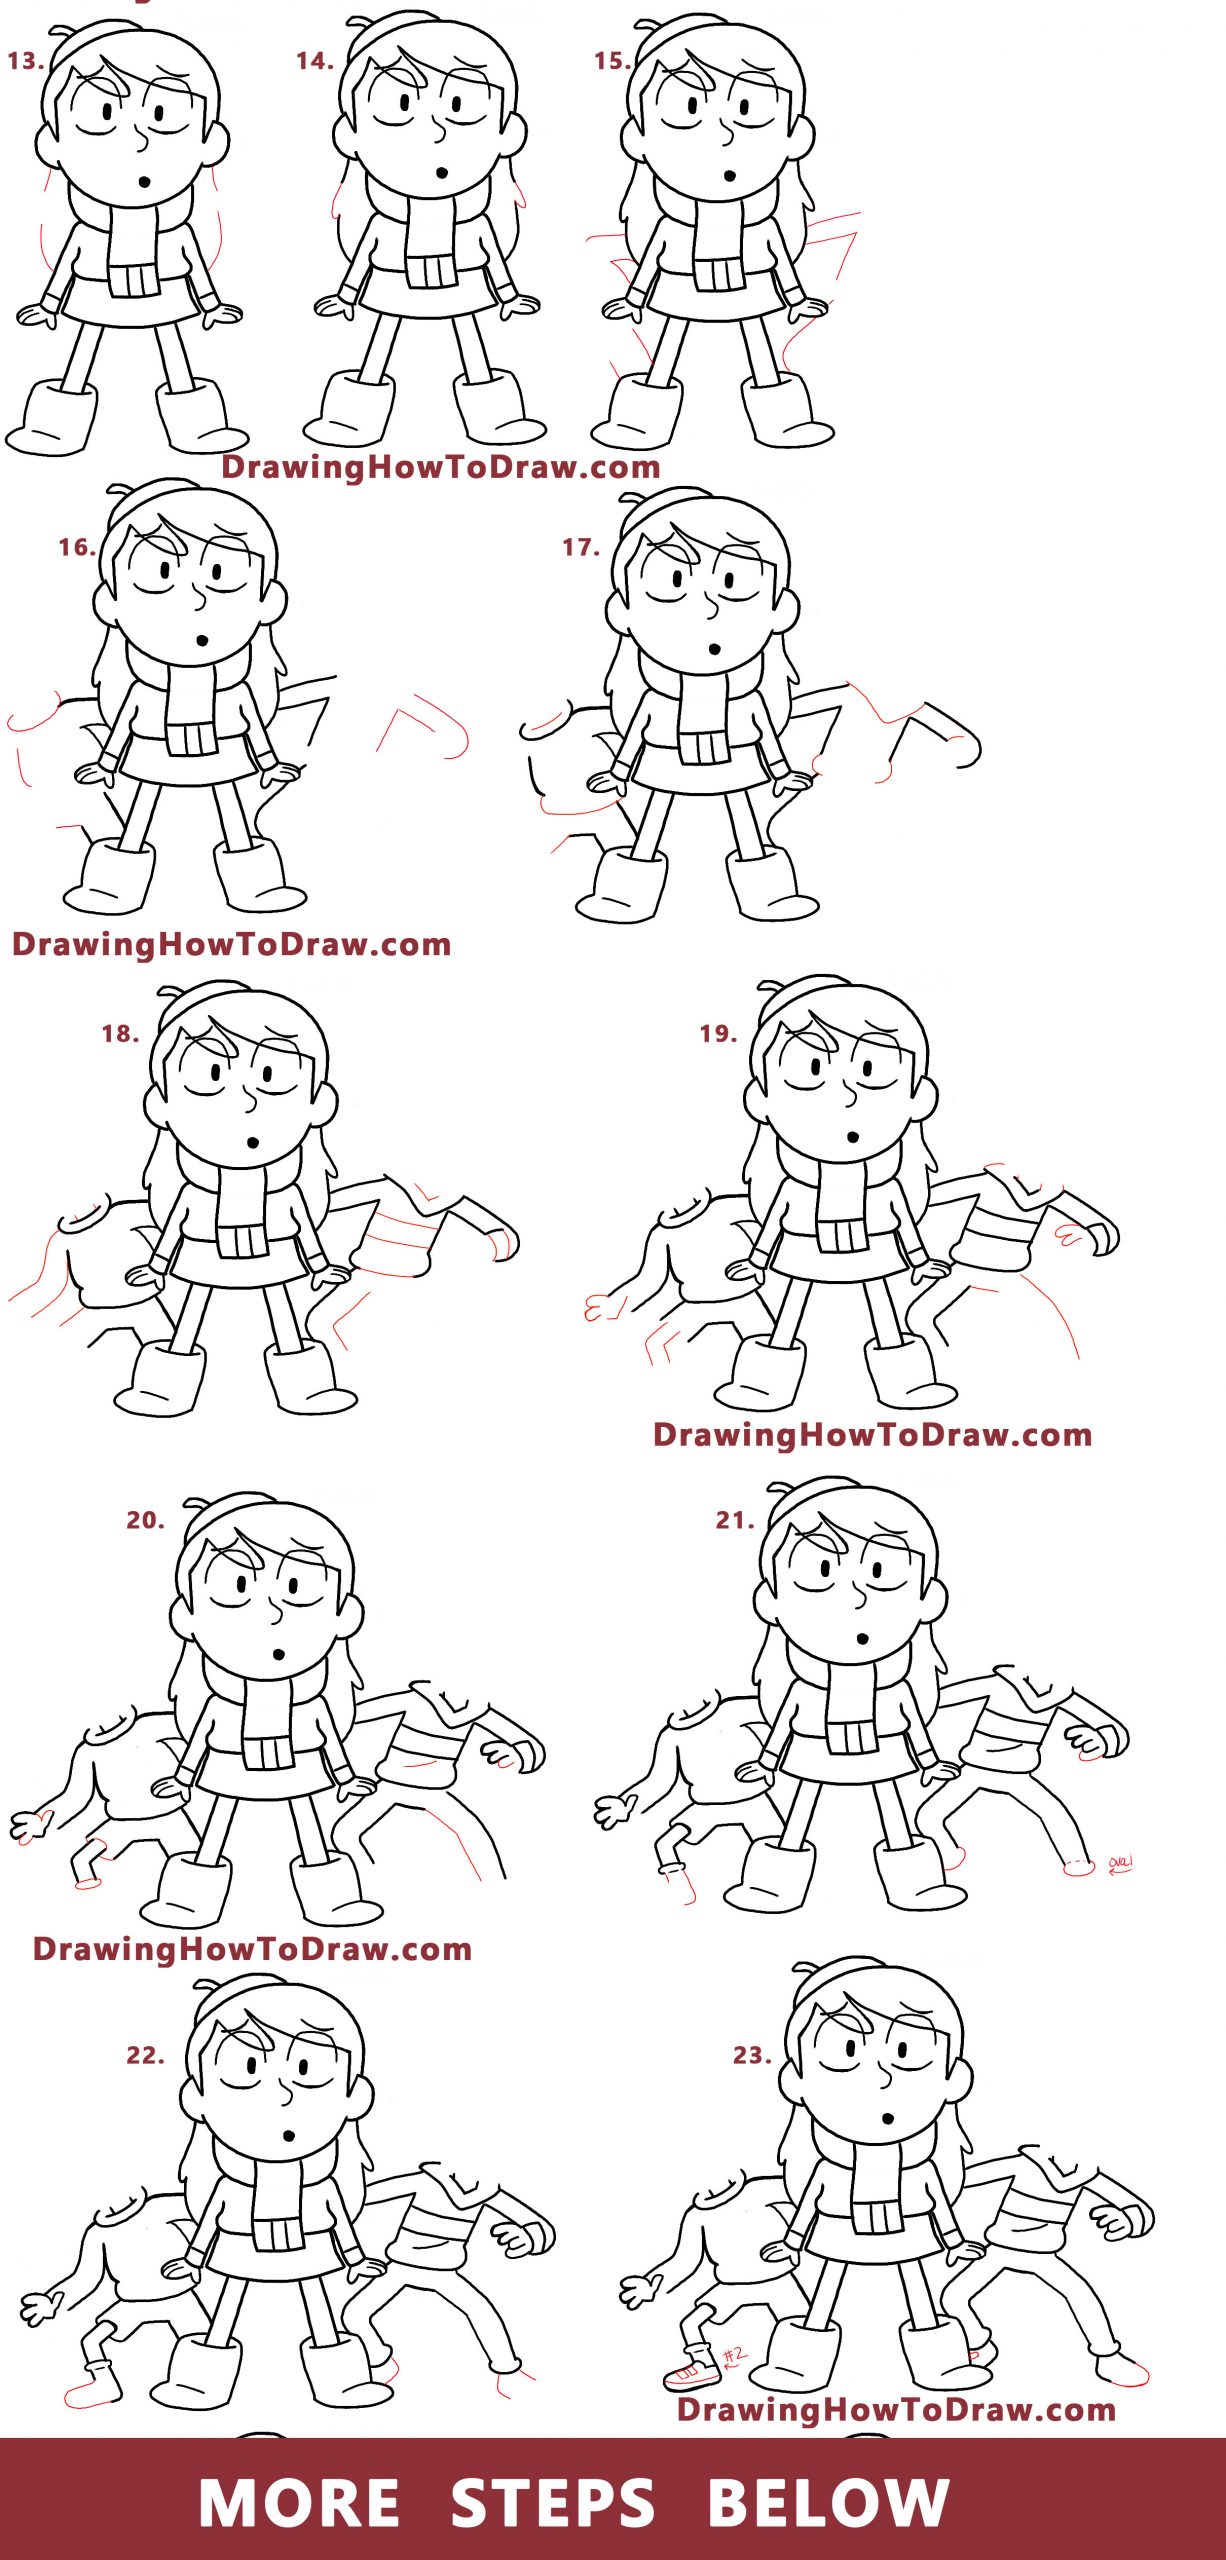 Learn How to Draw Hilda Characters (Hilda, David, and Frida) Easy Step by Step Drawing Tutorial for Kids